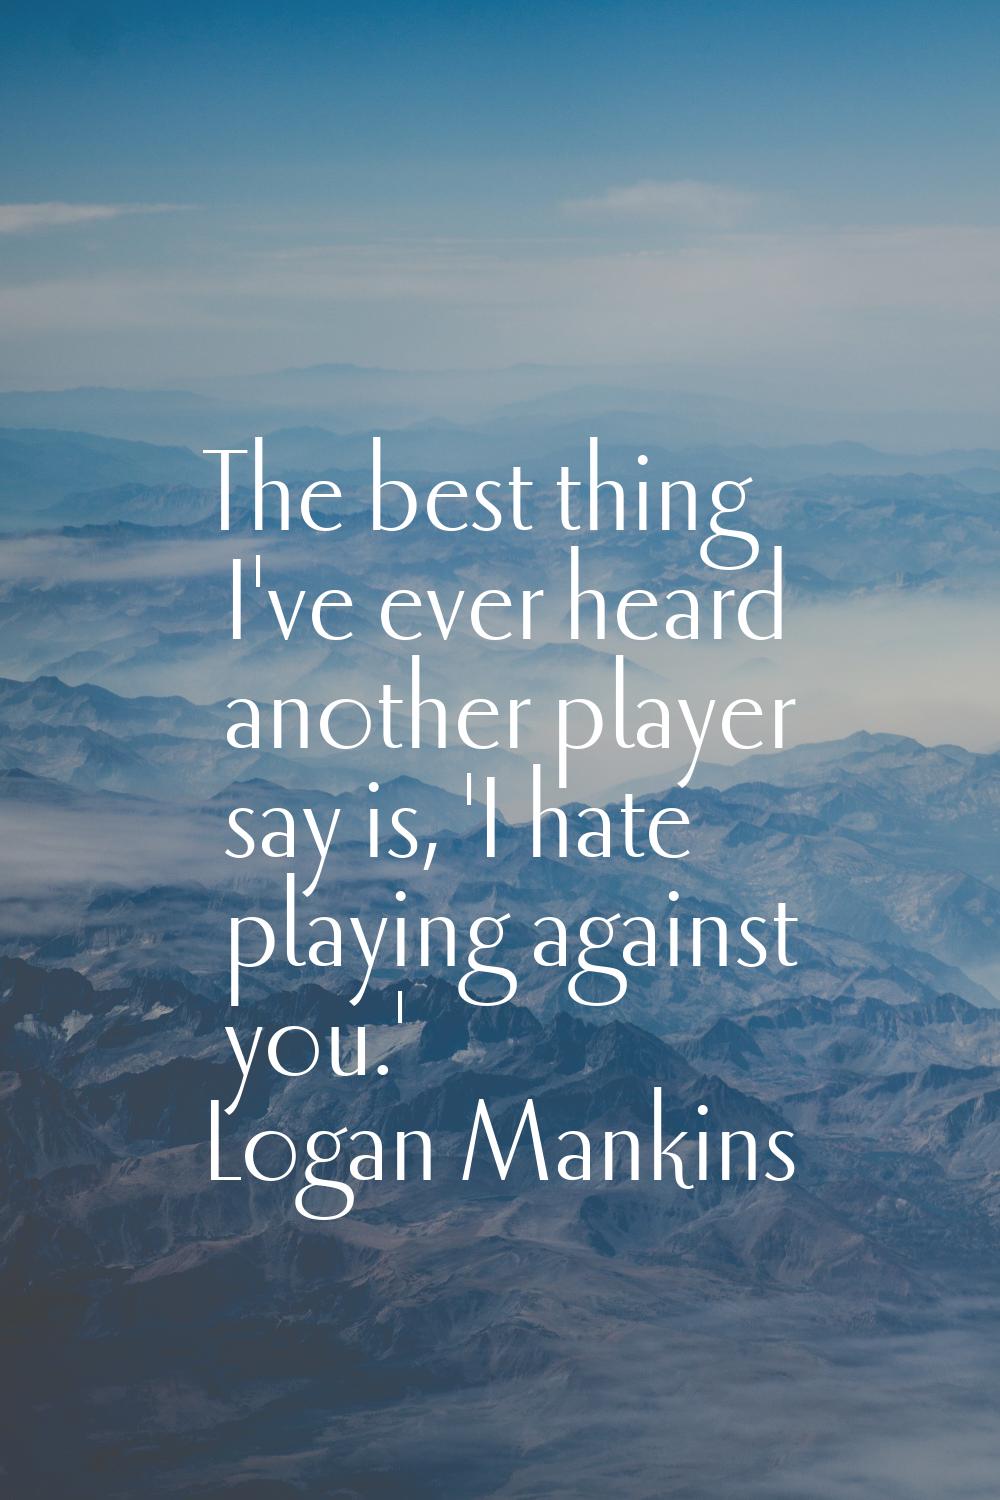 The best thing I've ever heard another player say is, 'I hate playing against you.'